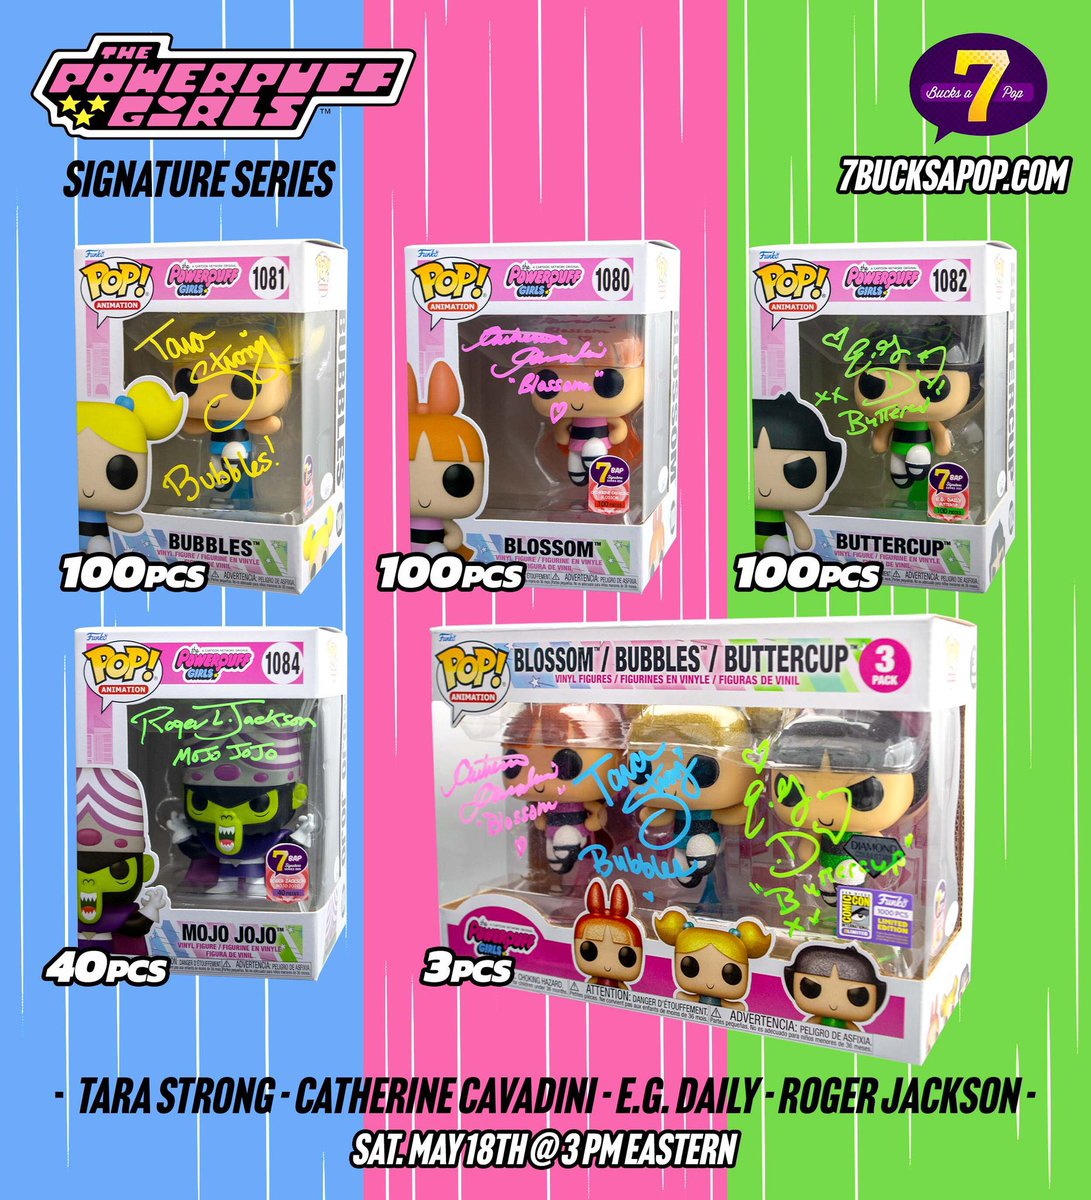 The #7BAPSignatureSeries is having a Powerpuff Girls reunion on Saturday May 18 @ 3pm Eastern! #Ad #PowerpuffGirls Tara Strong as Bubbles (100pcs) $125 + shipping Catherine Cavadini as Blossom (100pcs) $95 + shipping E.G. Daily as Buttercup (100pcs) $125 + shipping Bundle of